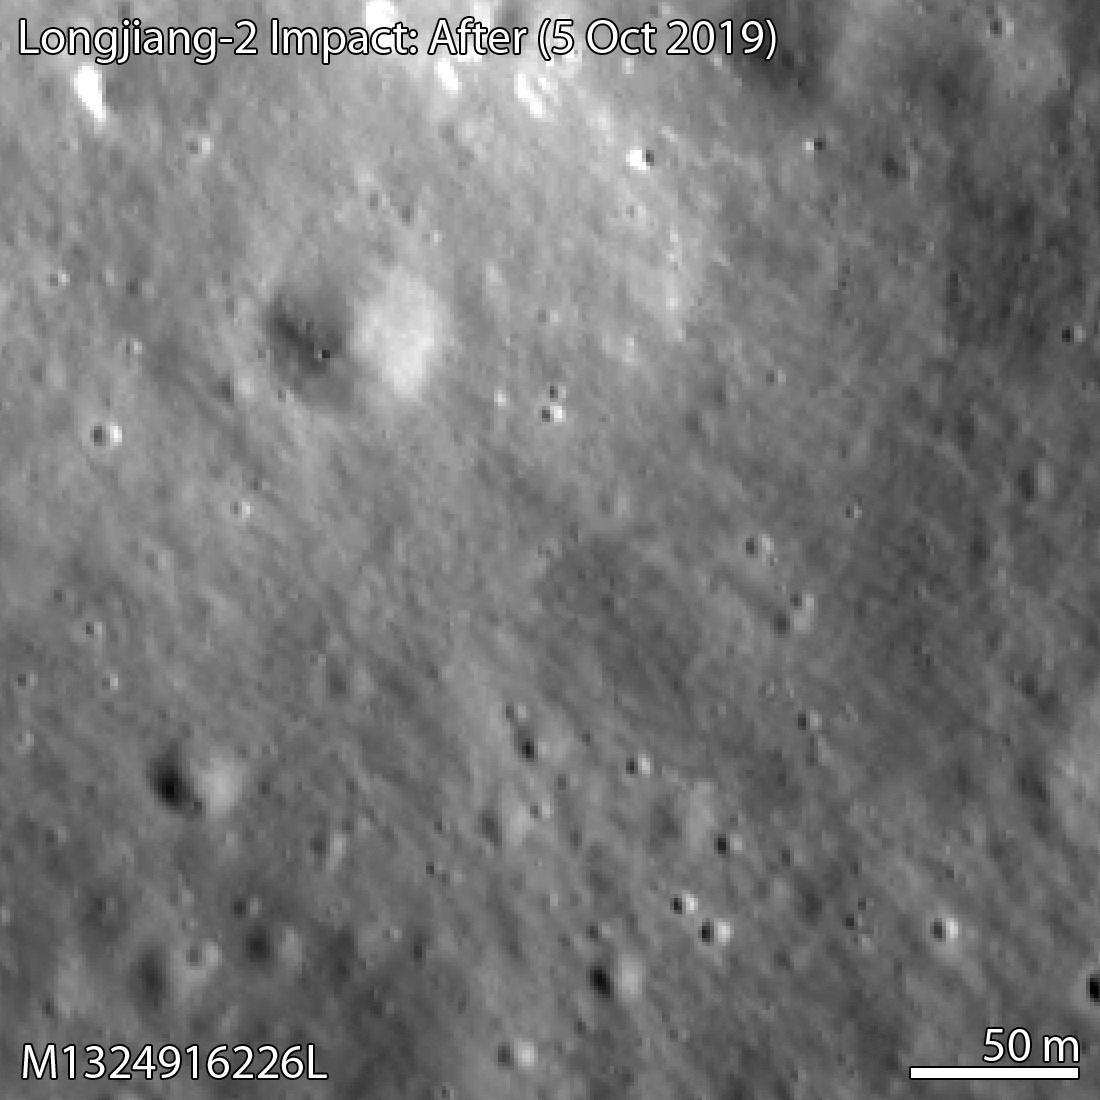 Lunar Reconnaissance Orbiter Camera images taken before and after the impact of China's Longjiang-2 satellite show the crater likely formed by the event.